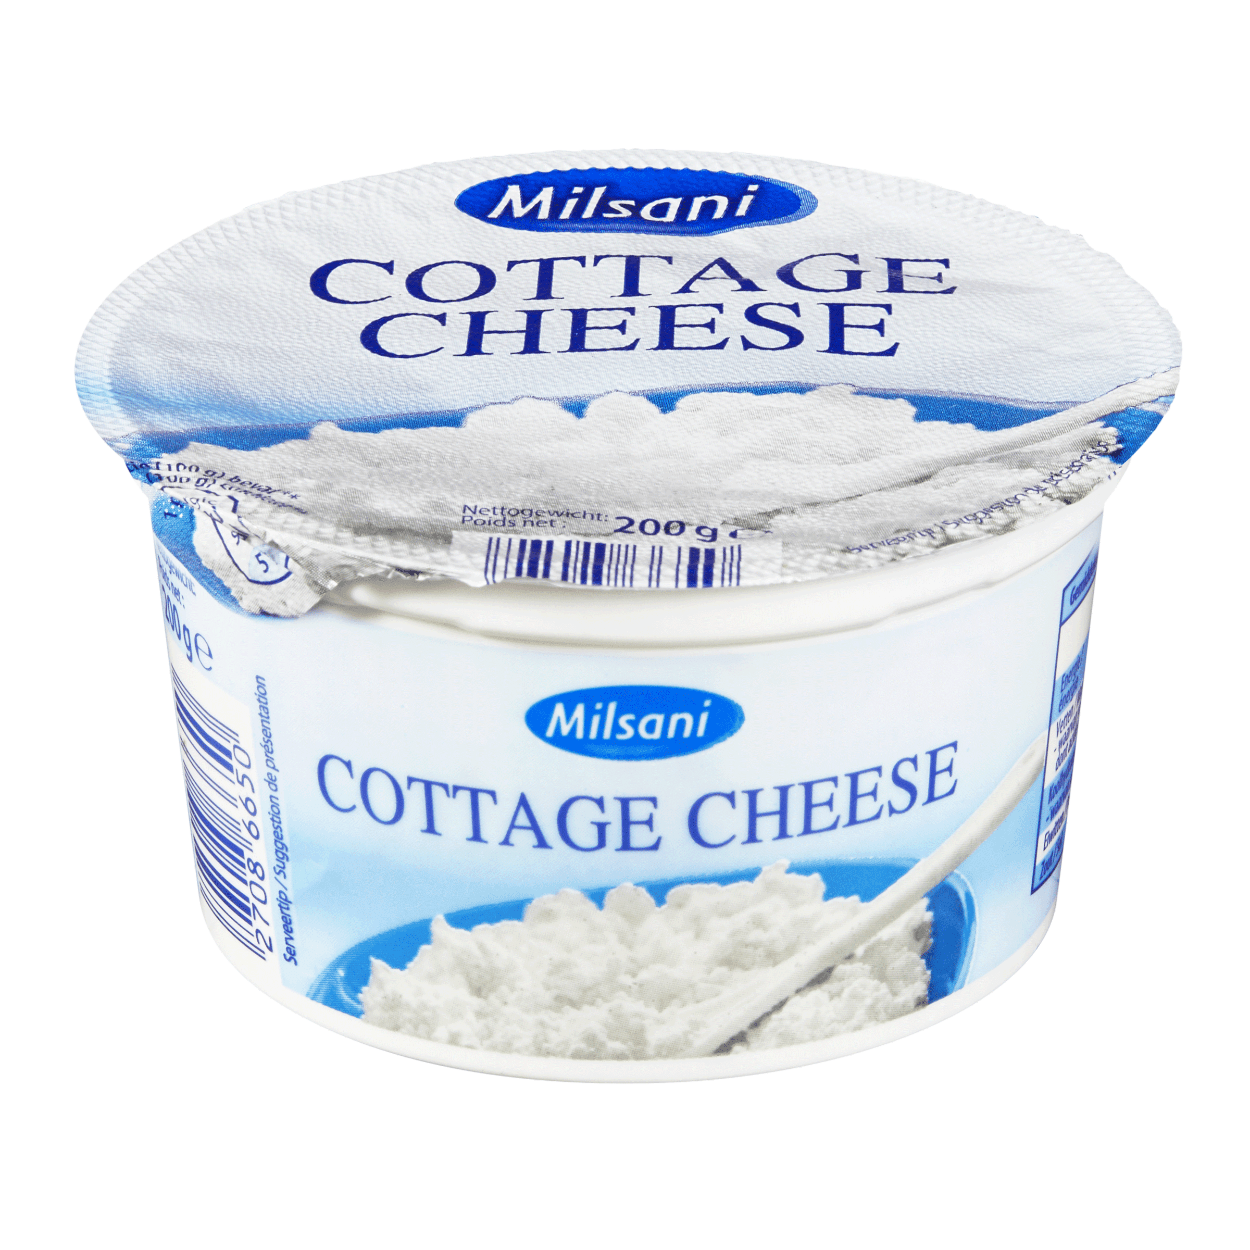 Is Cottage Cheese Finally Having a Comeback? | Kitchn